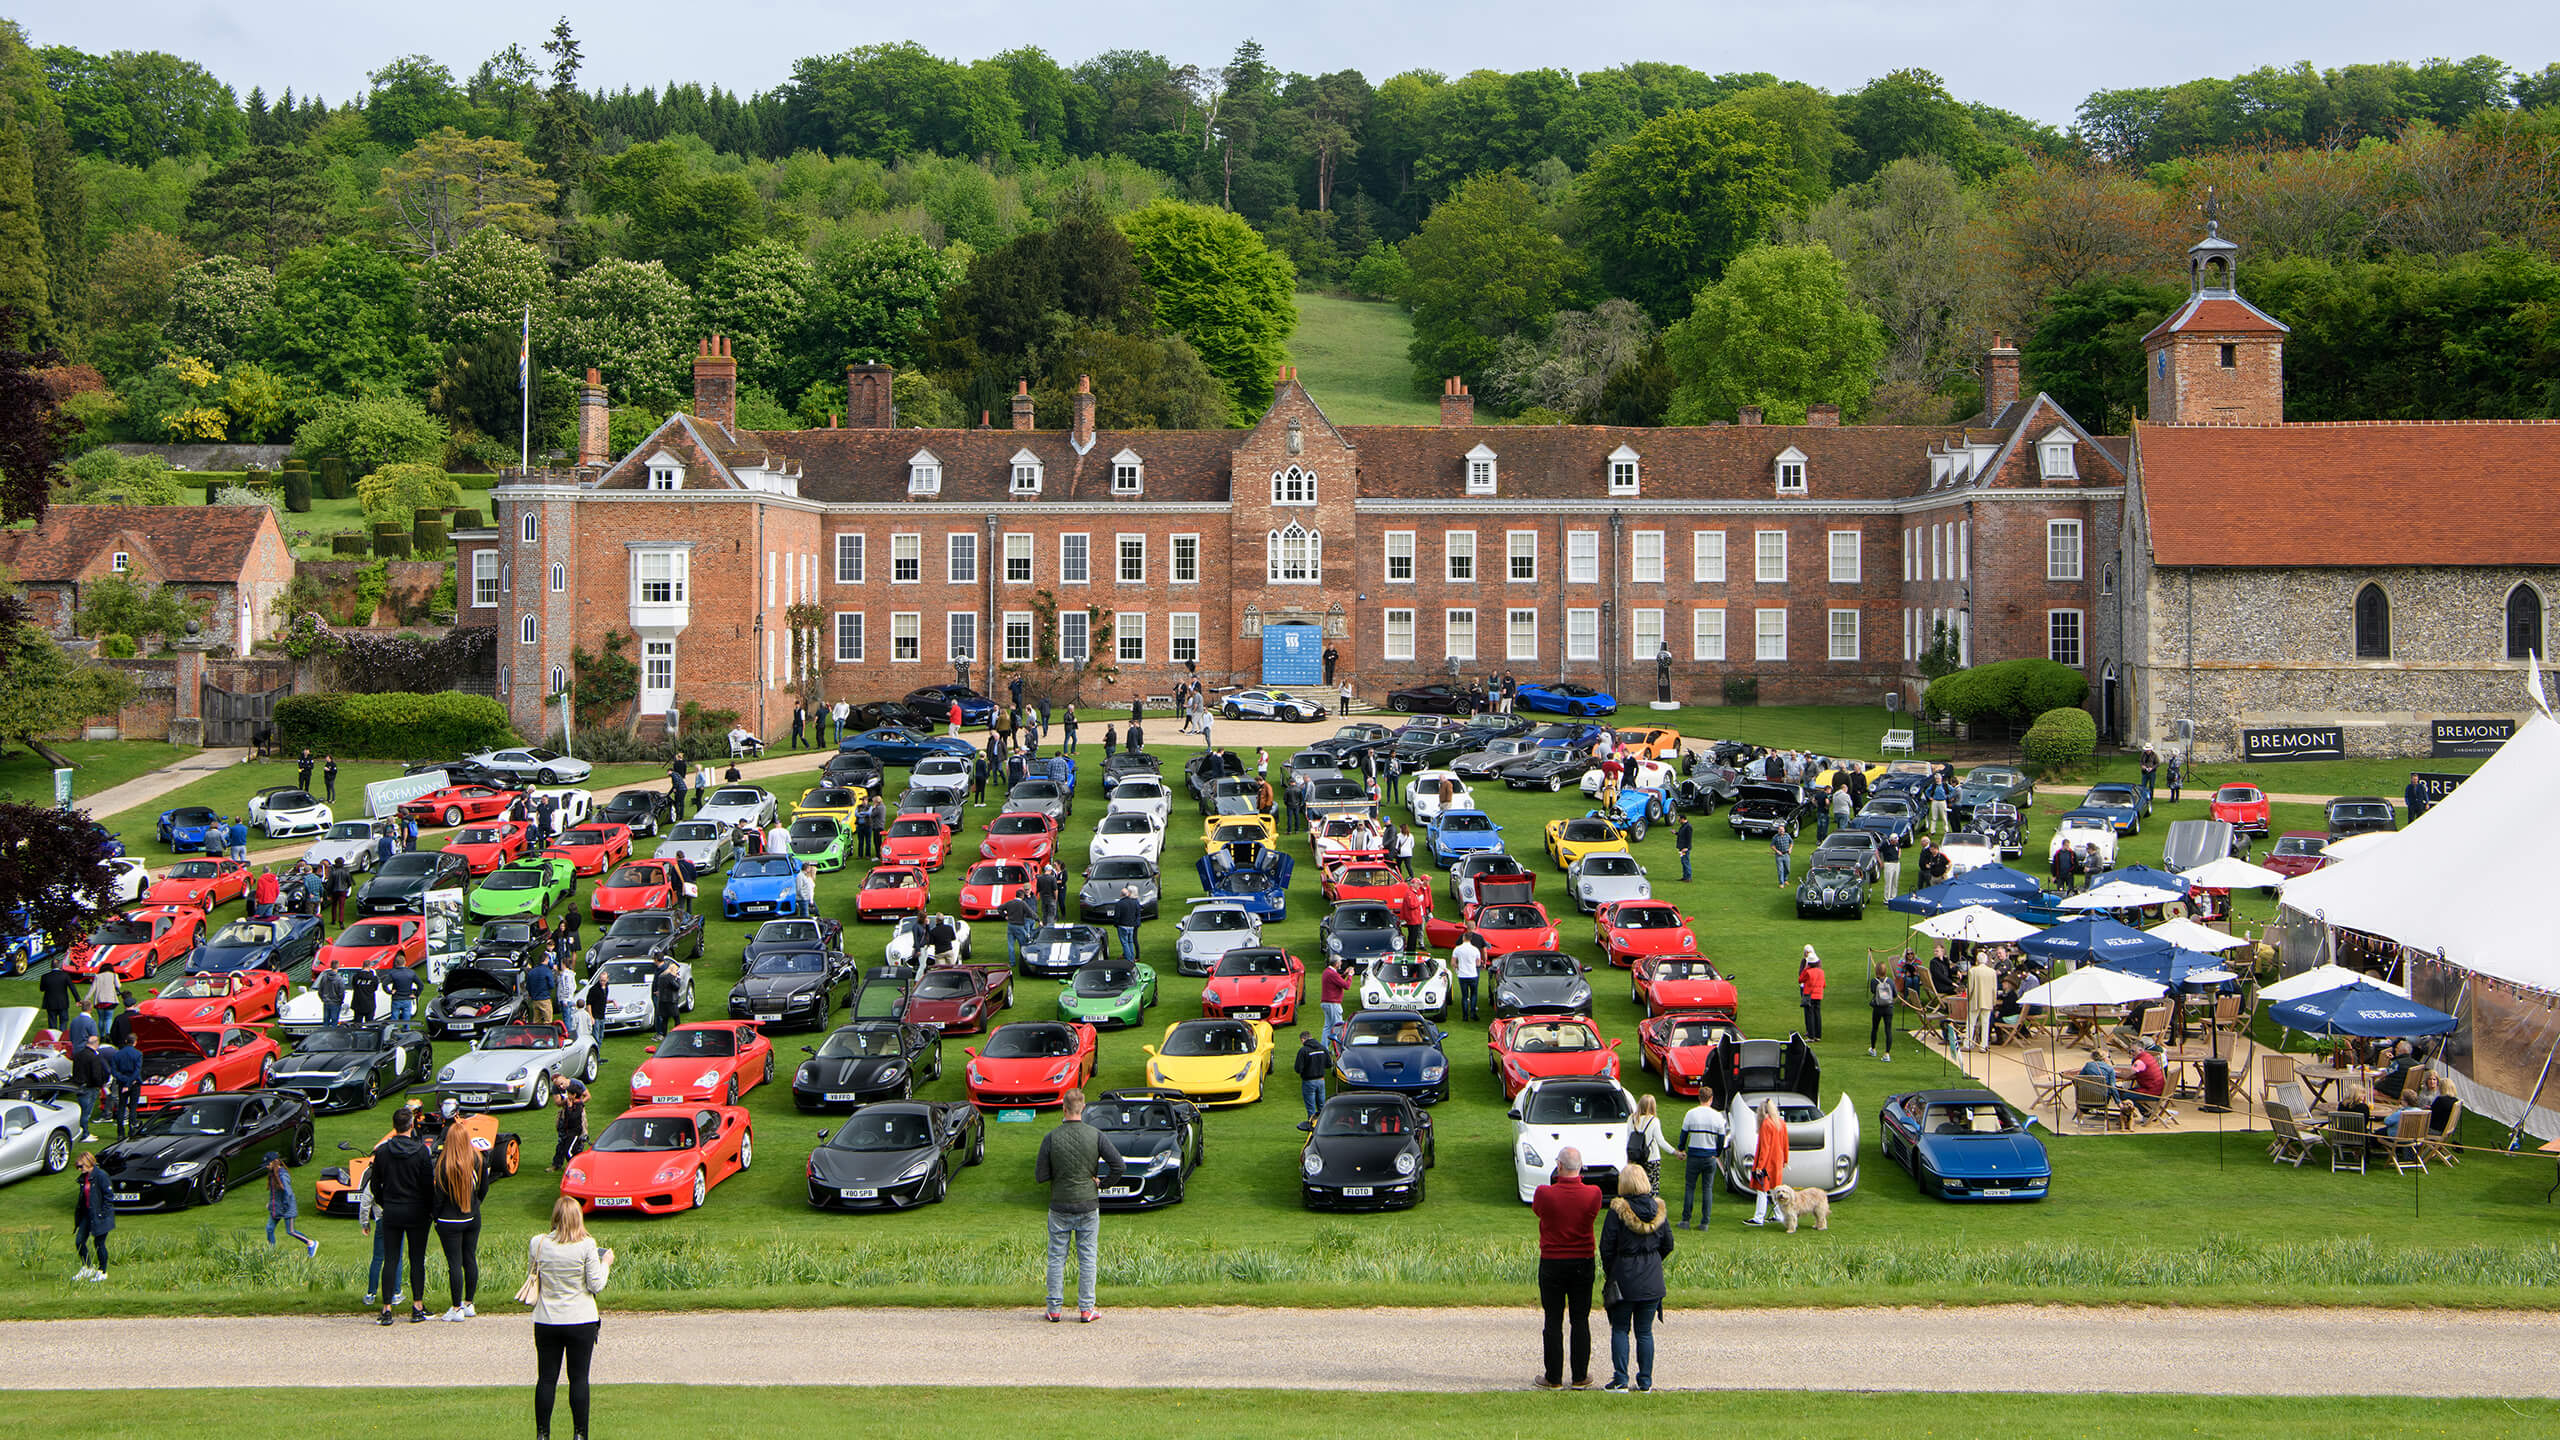 2021 Bremont Stonor Supercar Sunday – this weekend